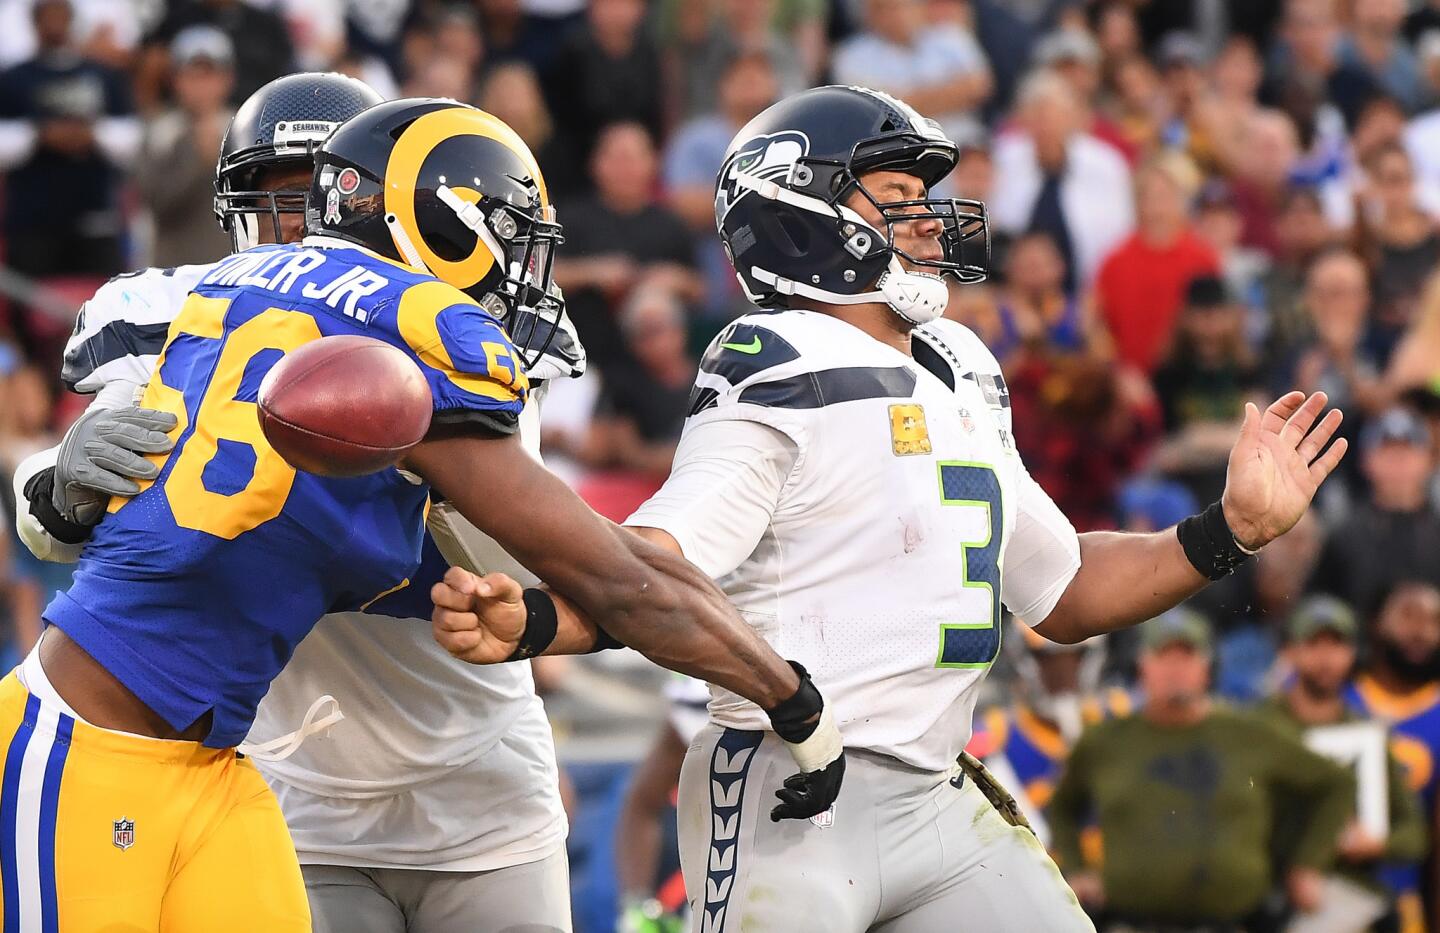 Rams linebacker Dante Fowler forces a fumble on Seattle Seahawks quarterback Russell Wilson in the fourth quarter at the Coliseum on Sunday.